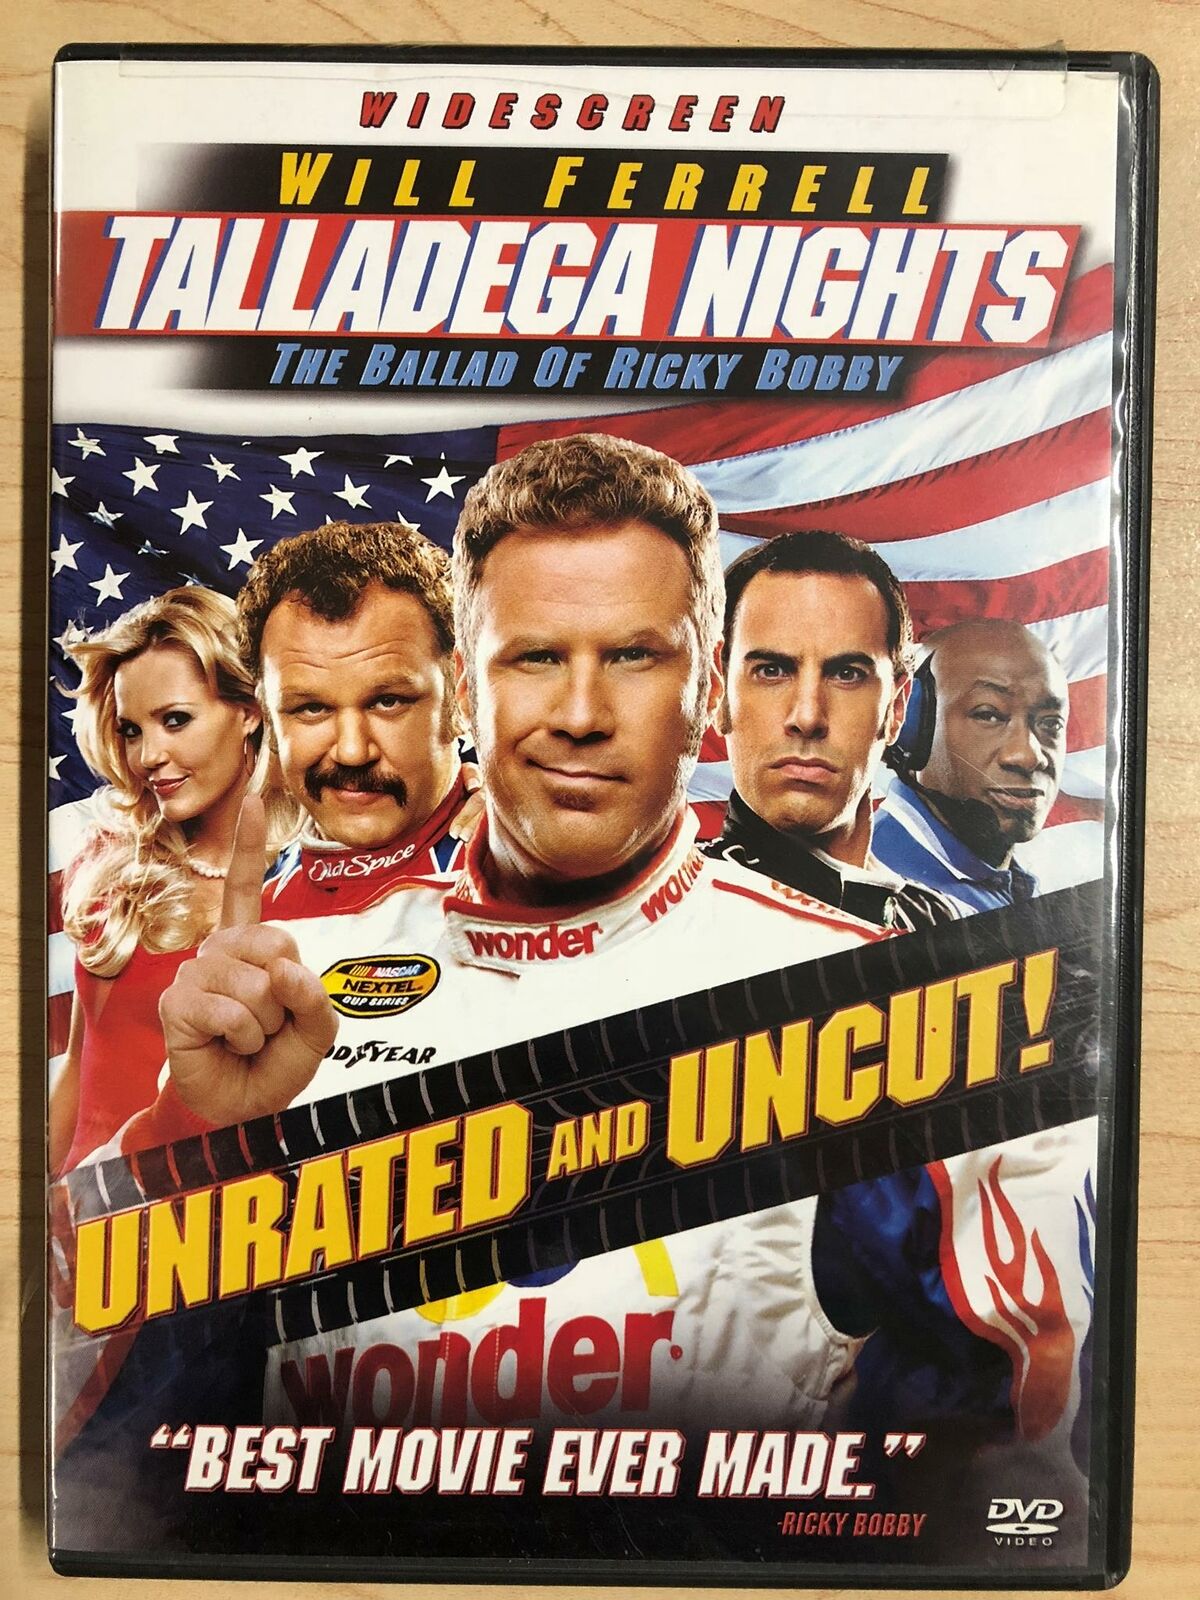 Talladega Nights - The Ballad of Ricky Bobby (DVD, Unrated, Widescreen) - G0823